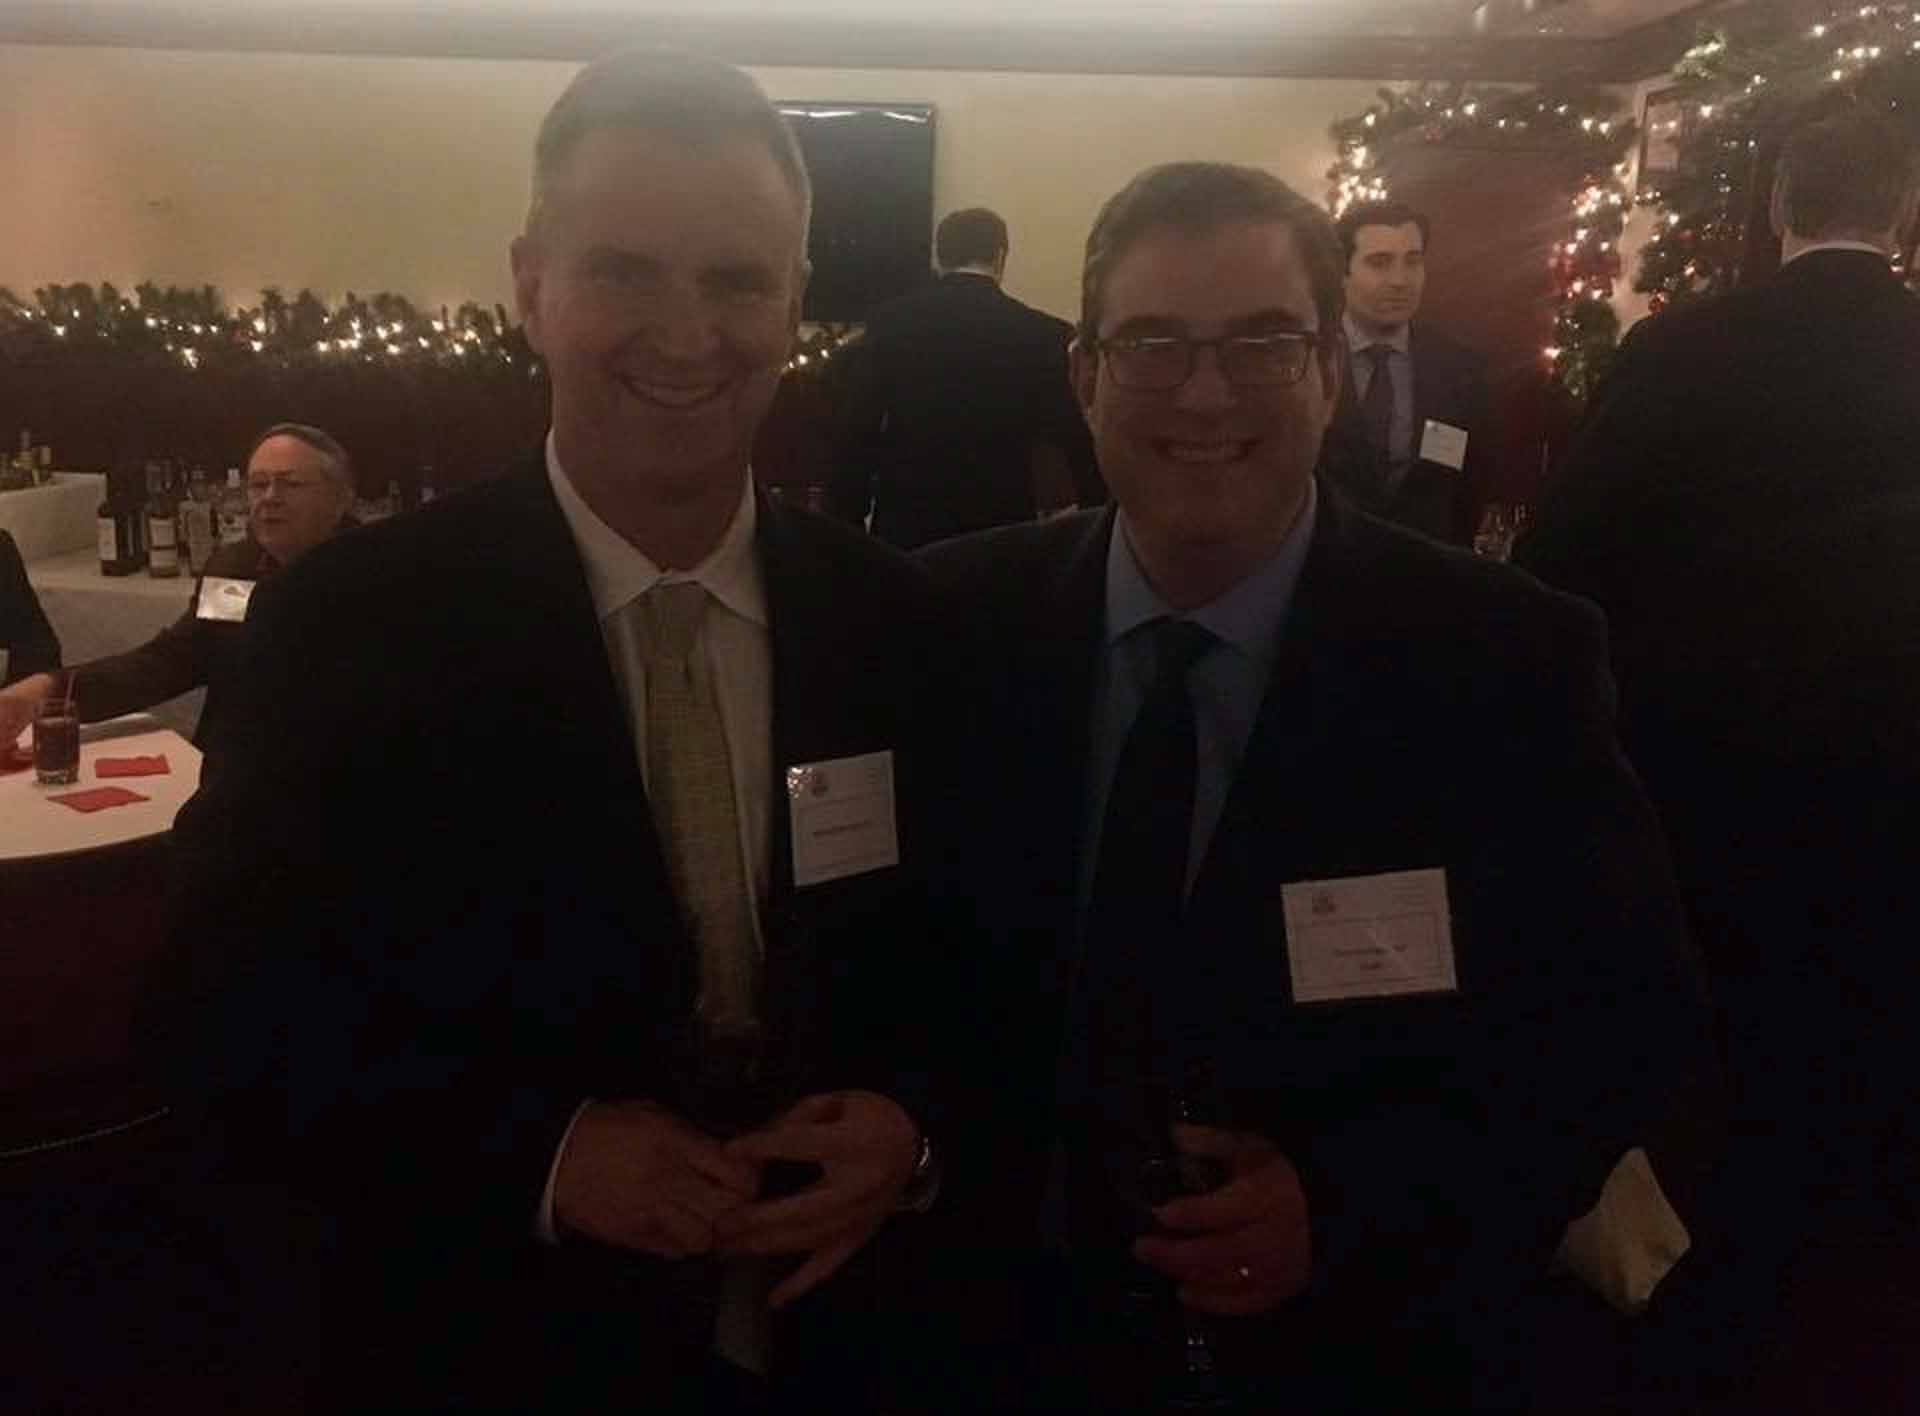 law-association-christmas-social-2019-two-people-smile